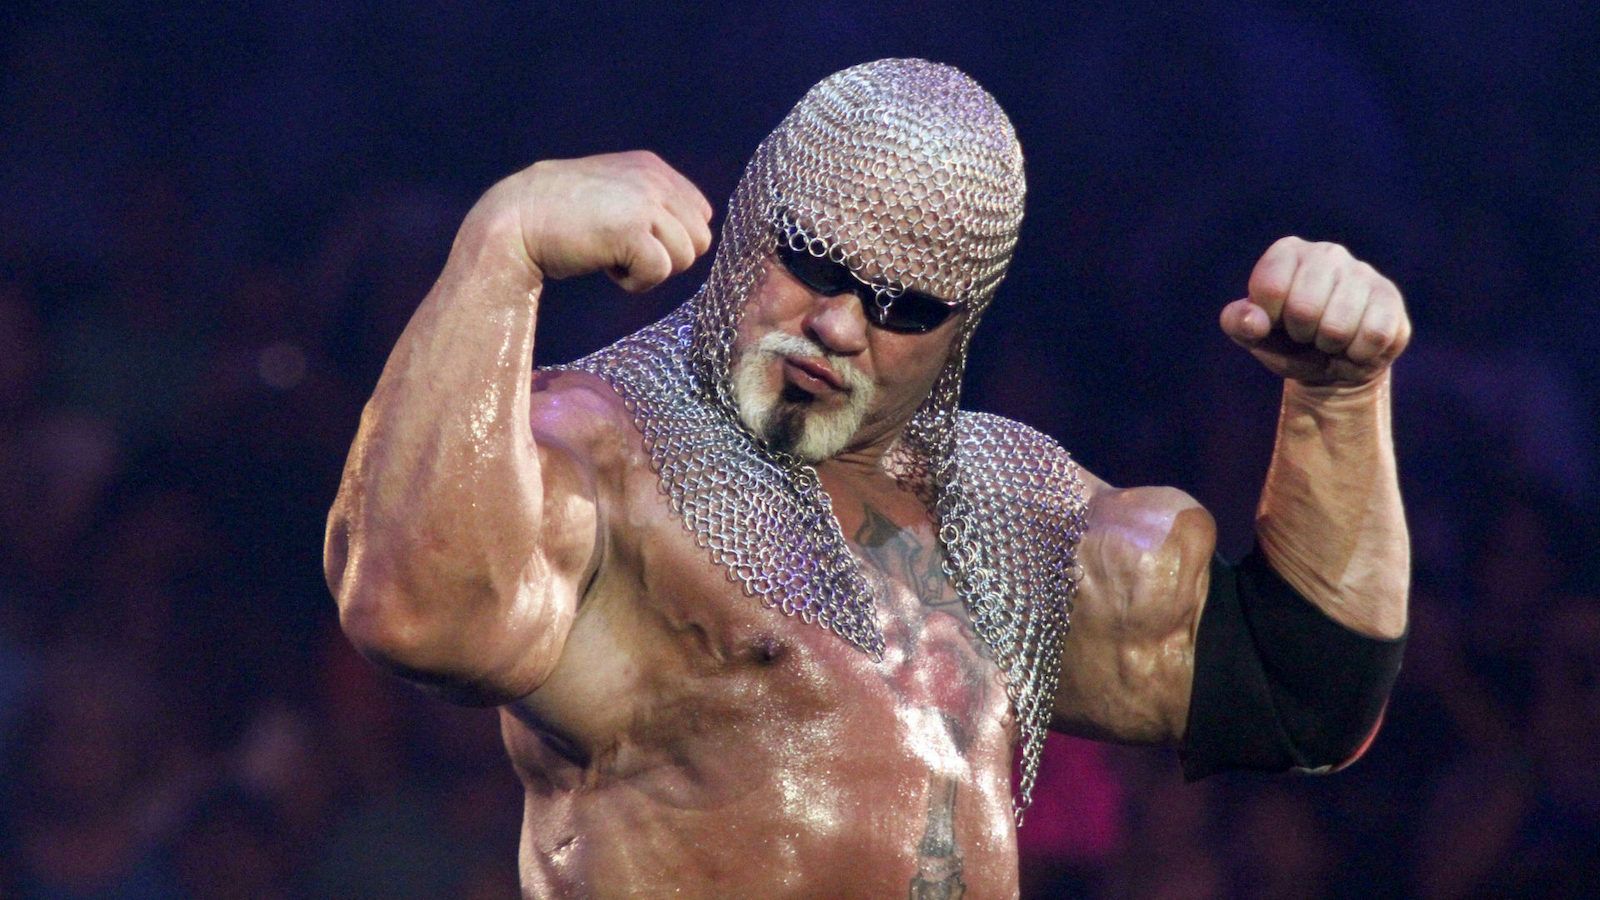 Scott Steiner Appears at Indie Show, Talks About His Health Scare